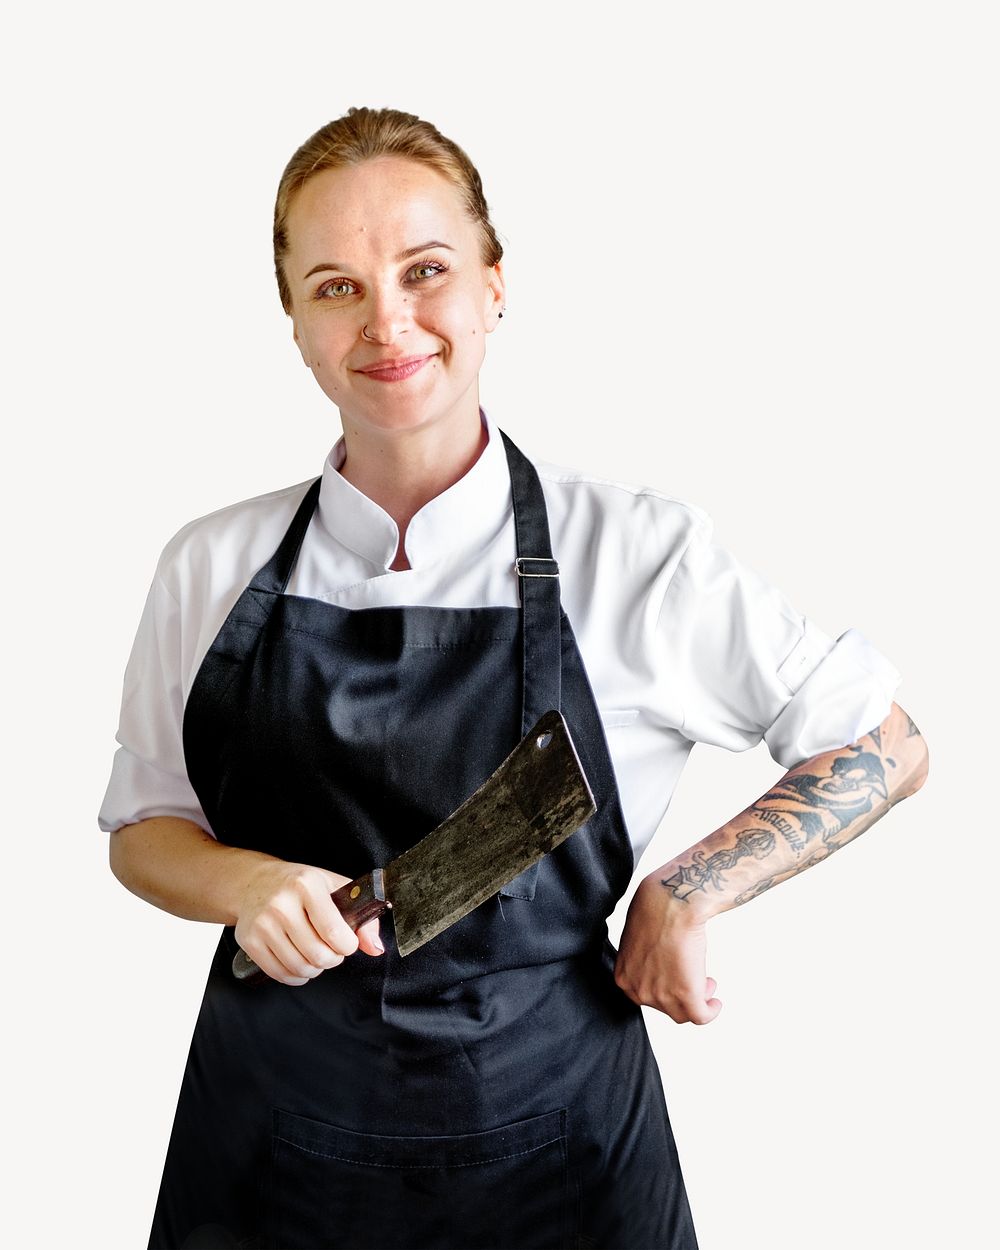 Female butcher isolated image on white